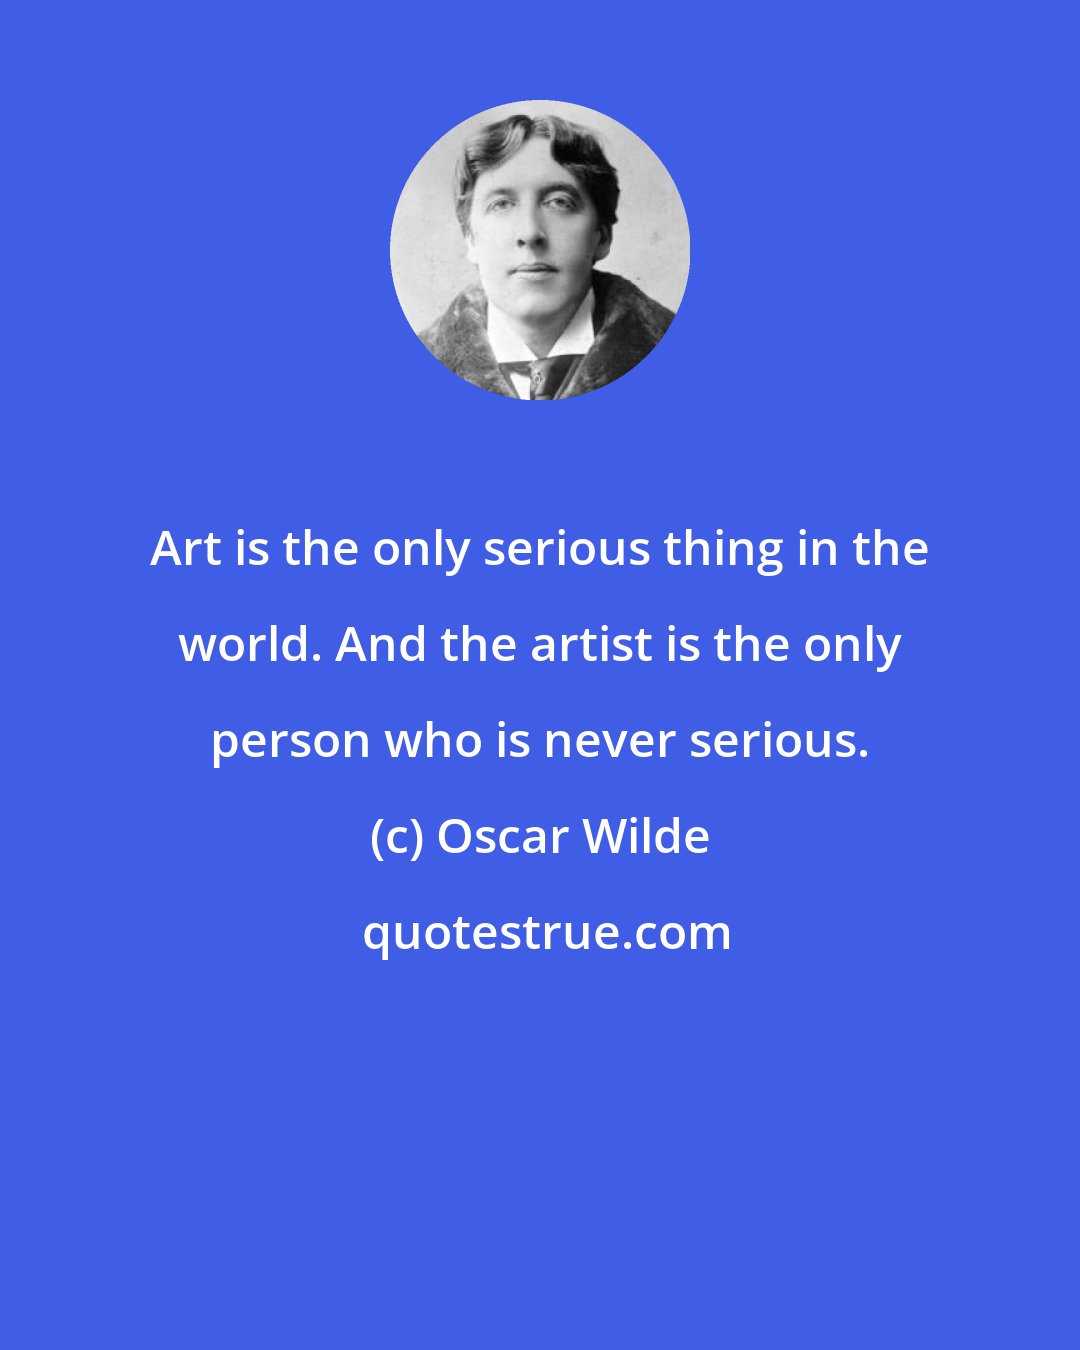 Oscar Wilde: Art is the only serious thing in the world. And the artist is the only person who is never serious.